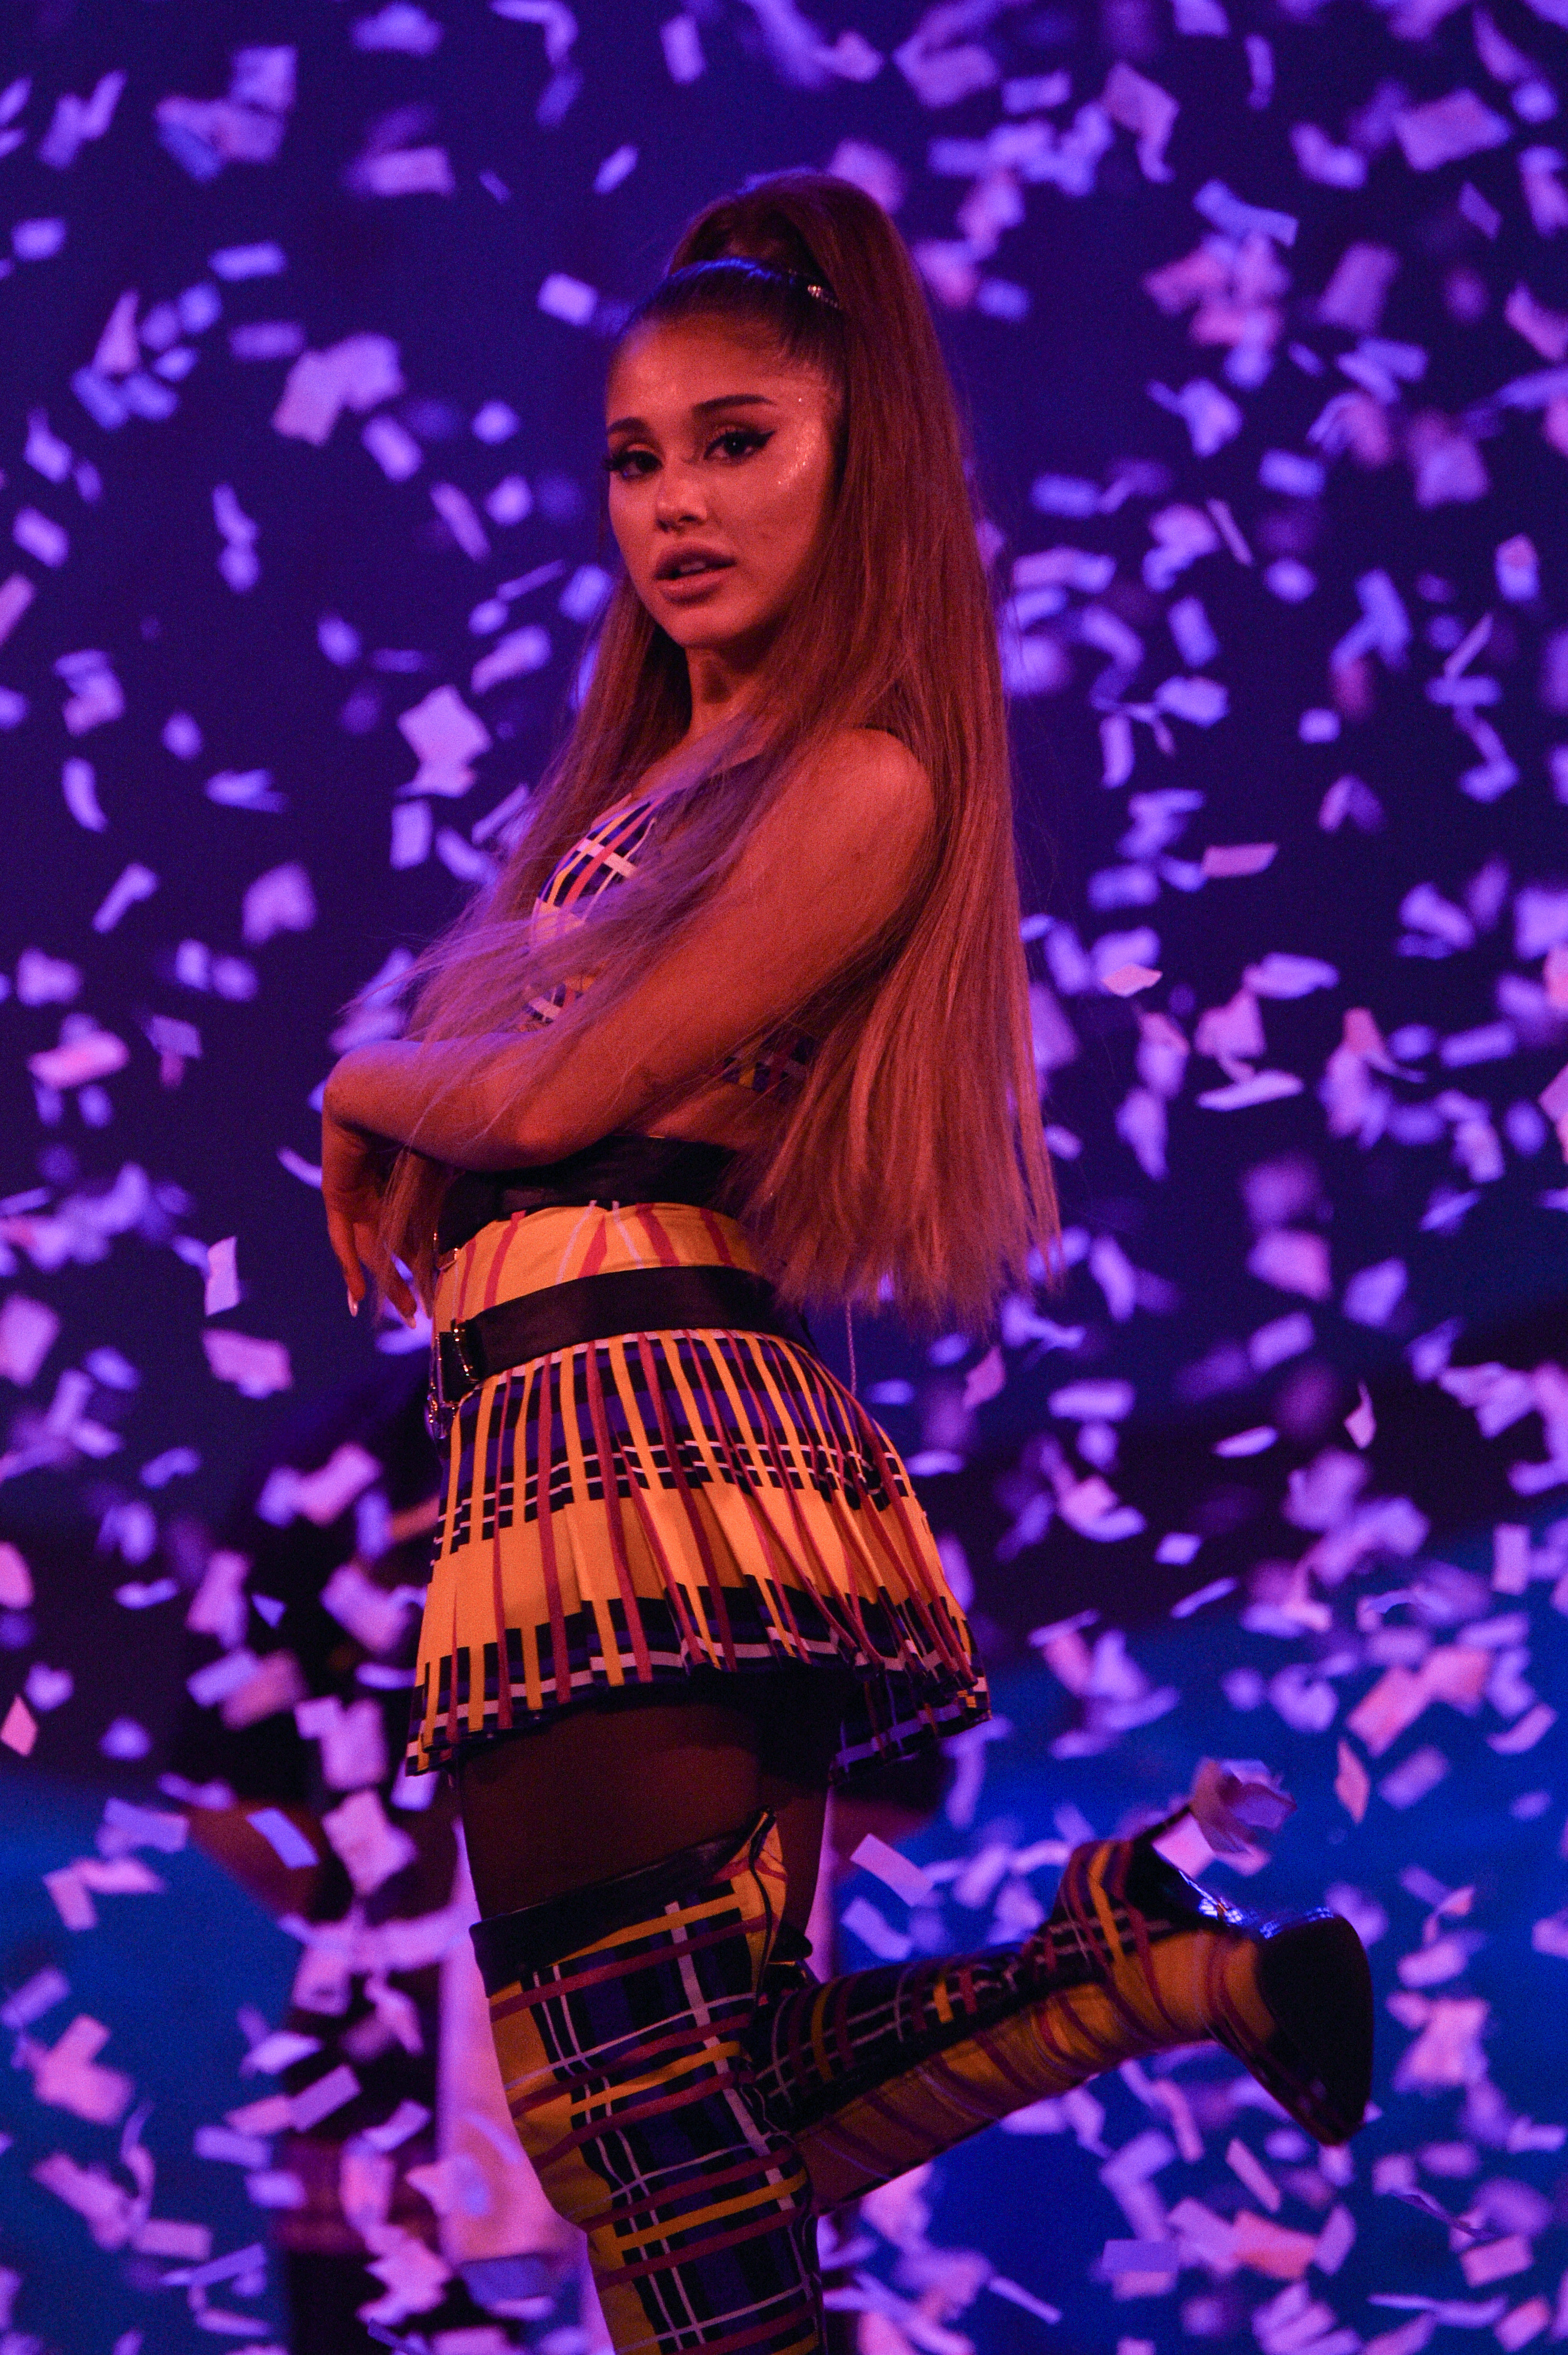 ariana on stage